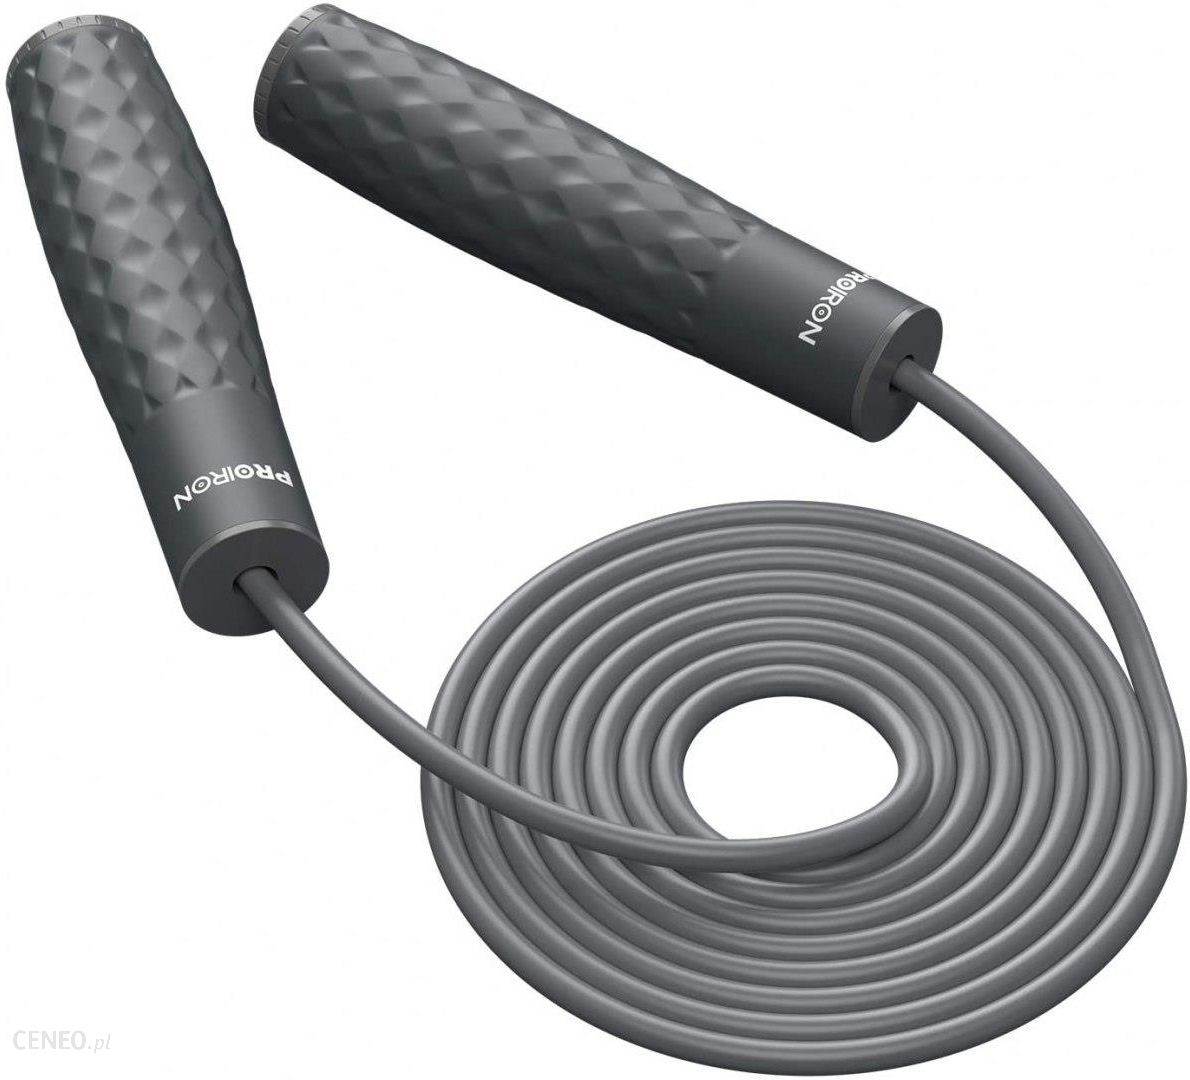 Proiron Weighted Skipping Rope 300Cm Grey Pvc